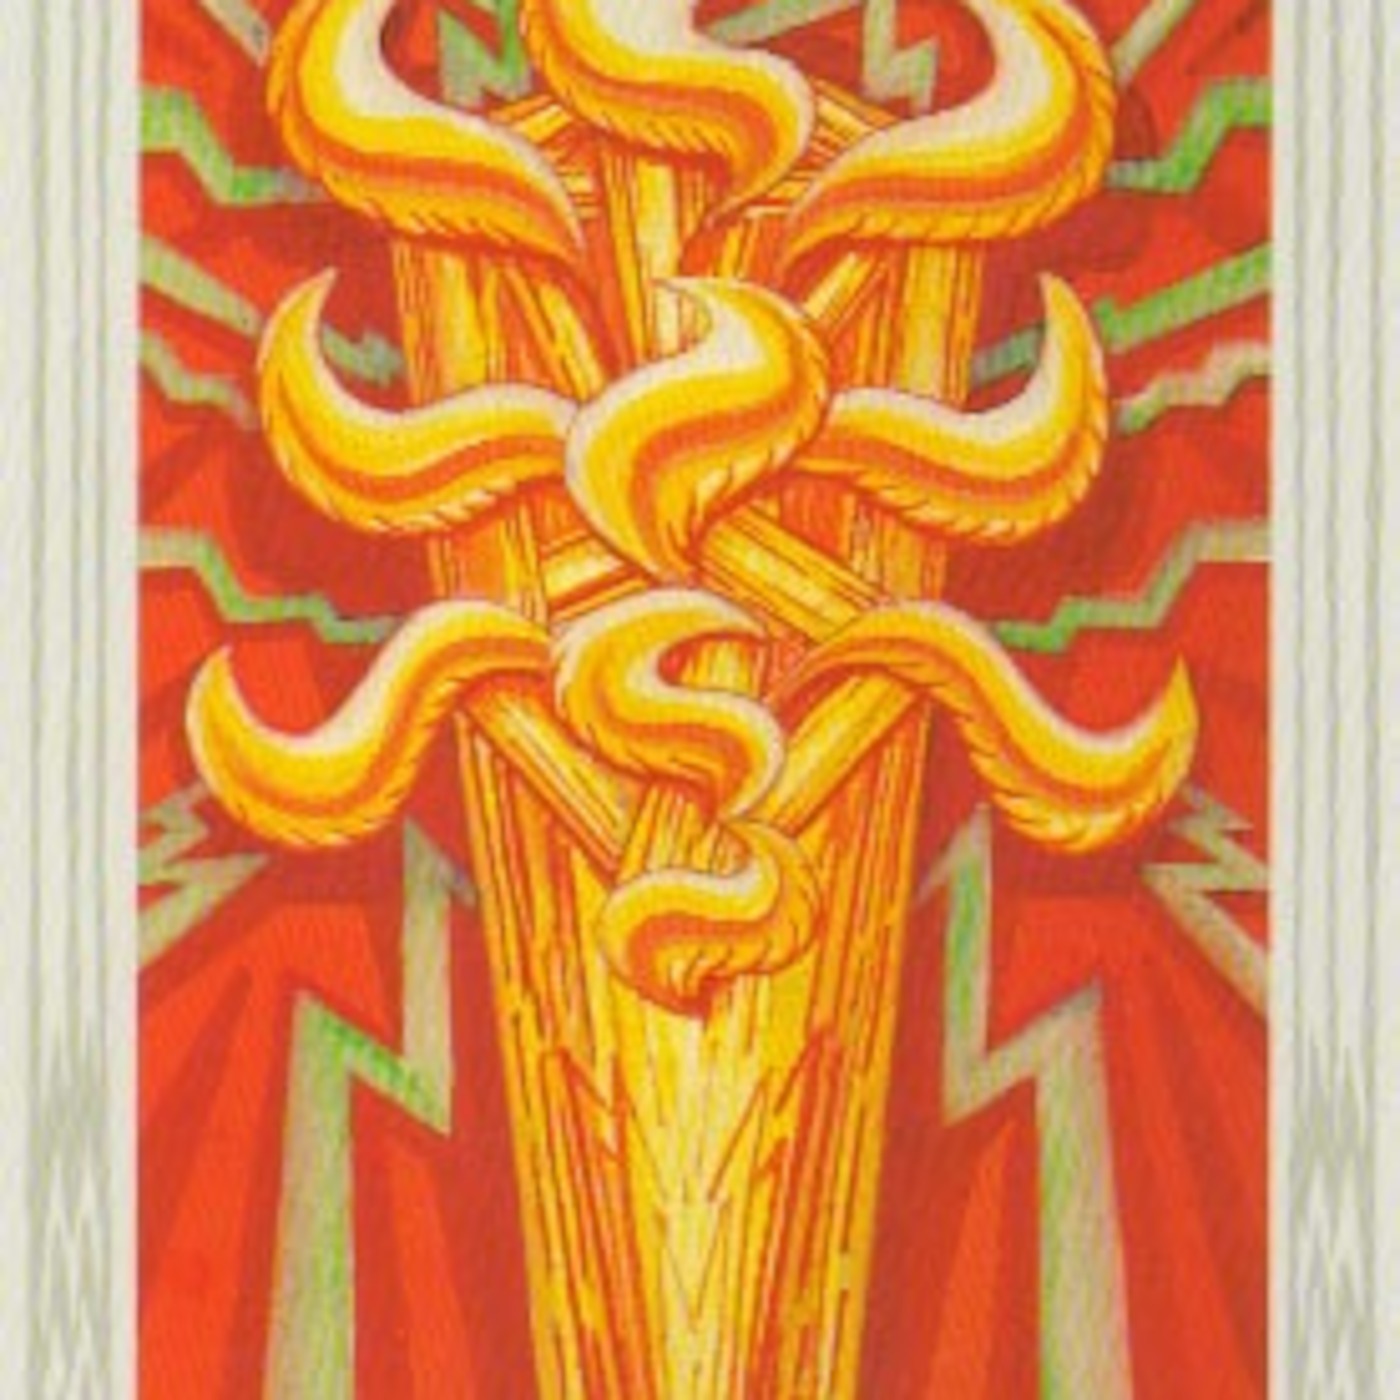 Seeds of Change: The Aces (Part III: The Ace of Wands)